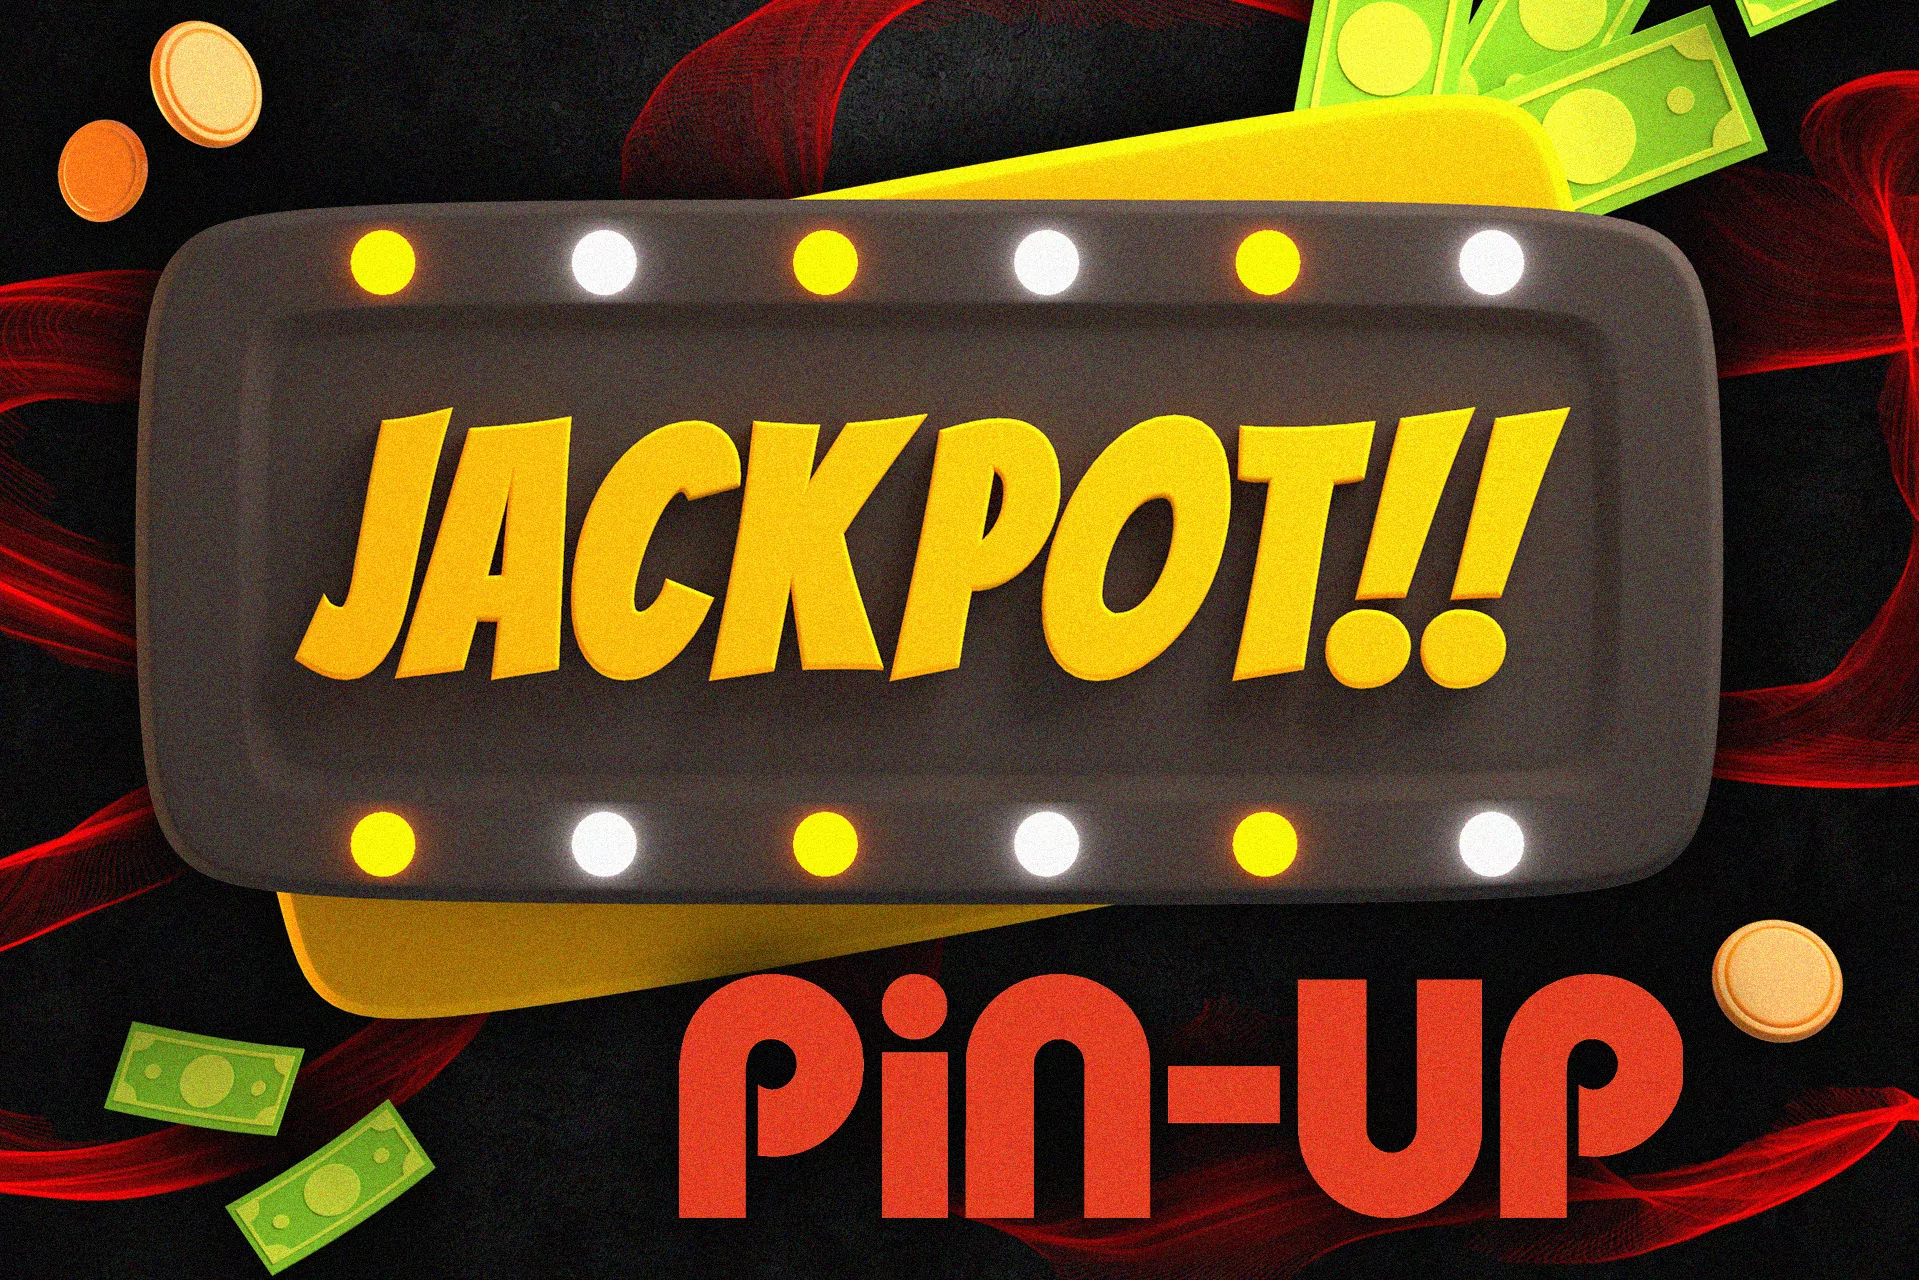 Try to win a jackpot in the Pin-Up casino.